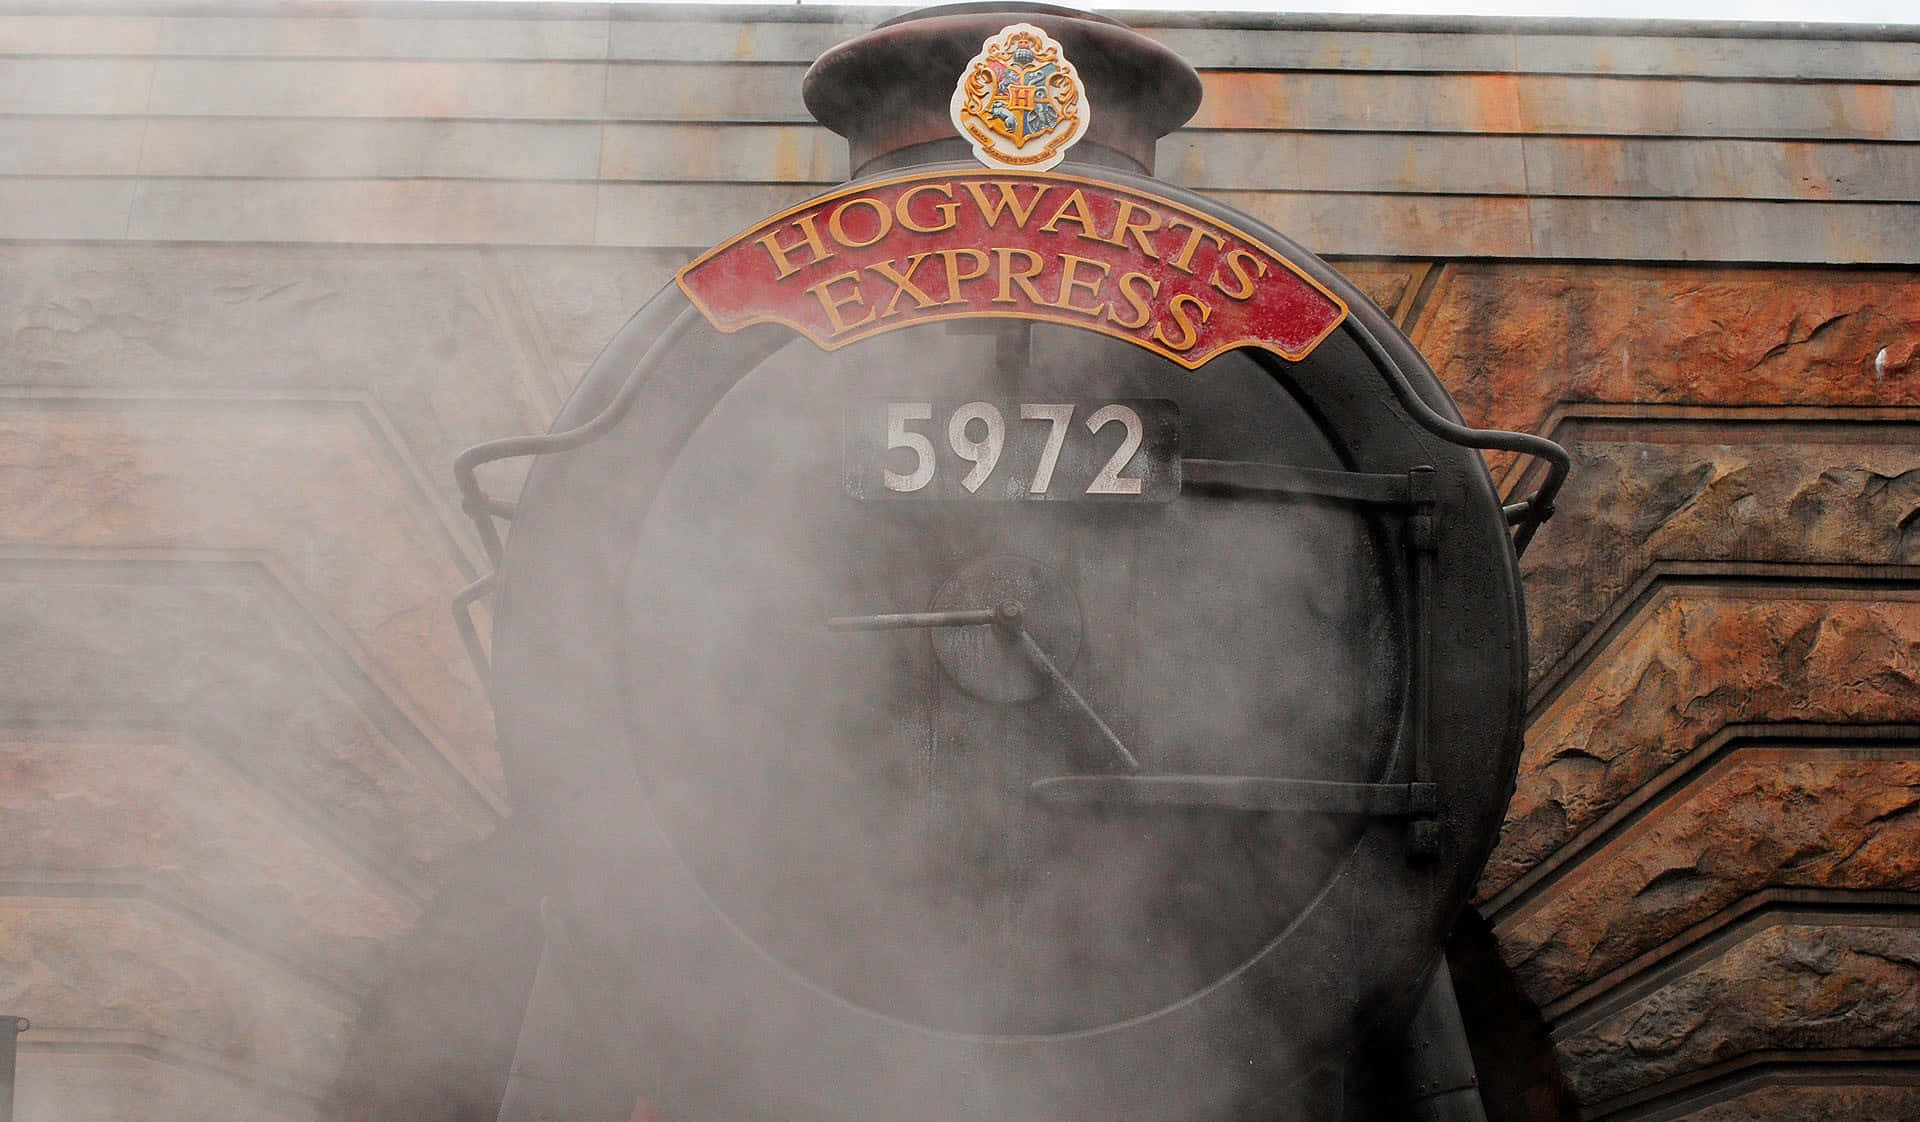 Hogwarts Express Steaming Through the Countryside Wallpaper